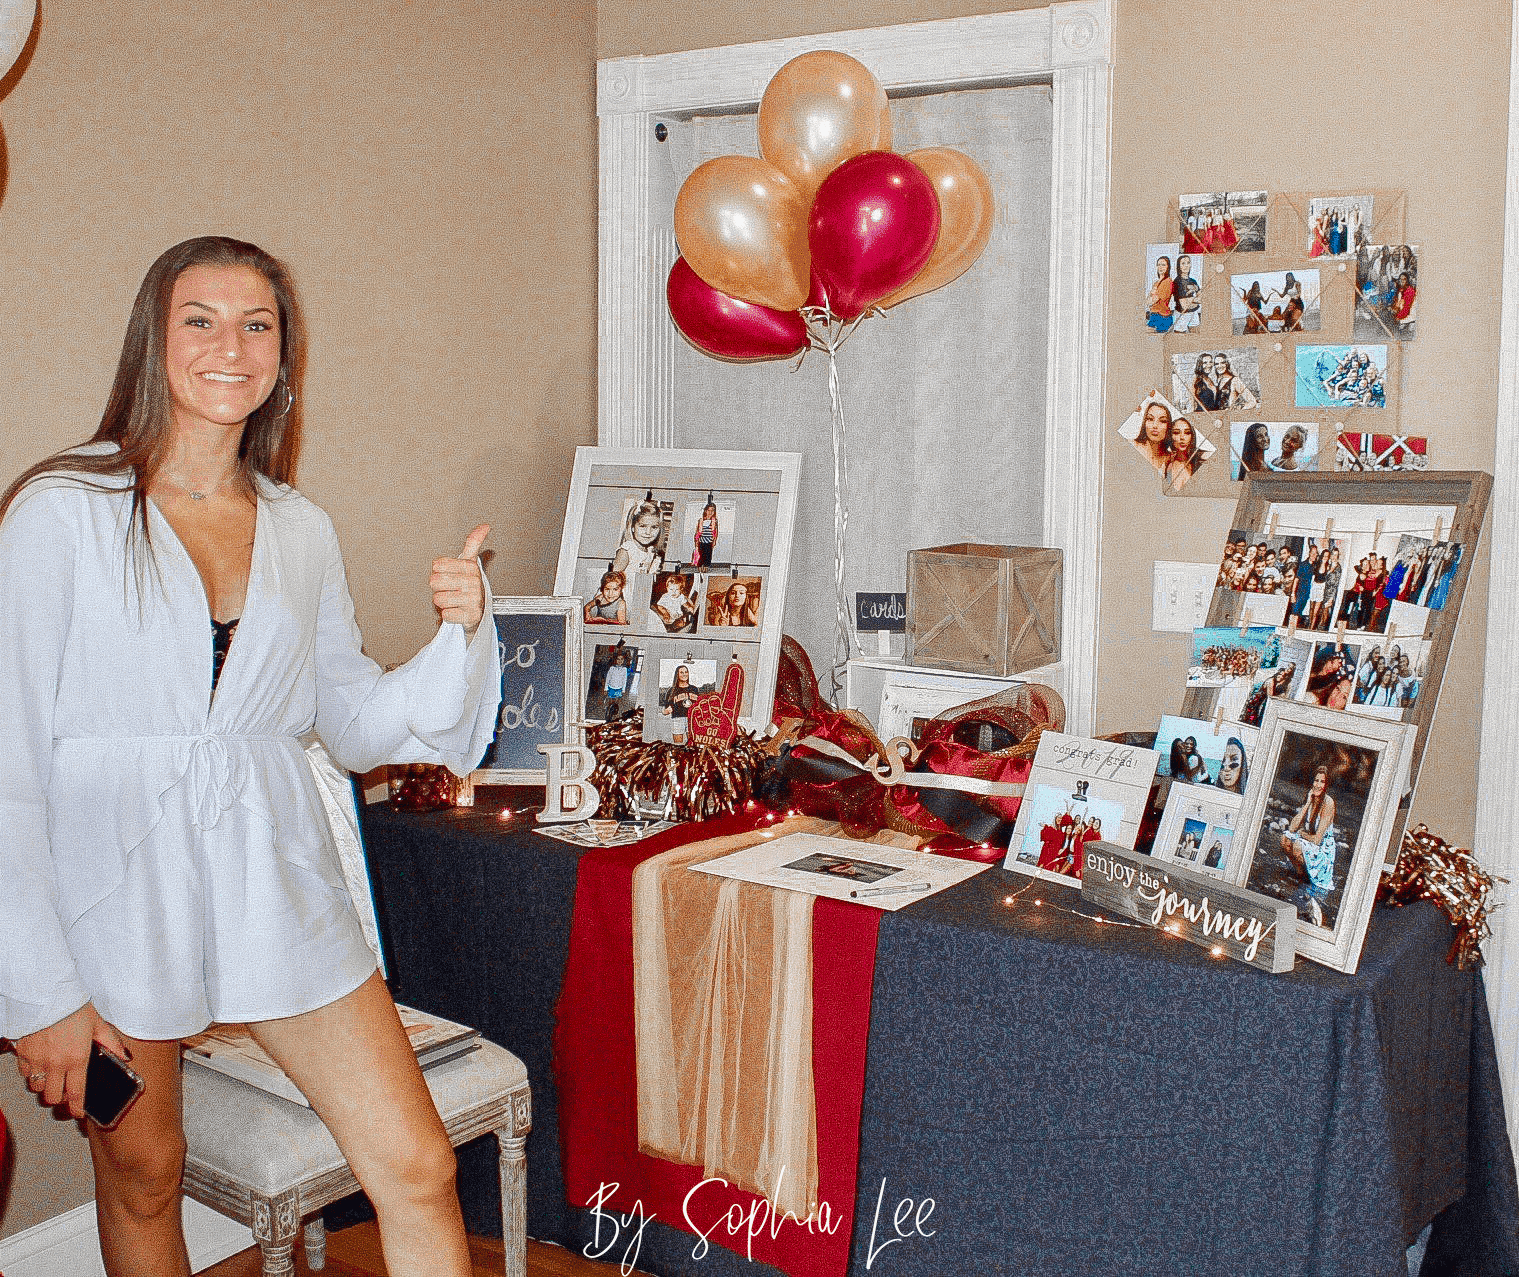 52 Best Graduation Party Ideas Guaranteed To Impress By Sophia Lee